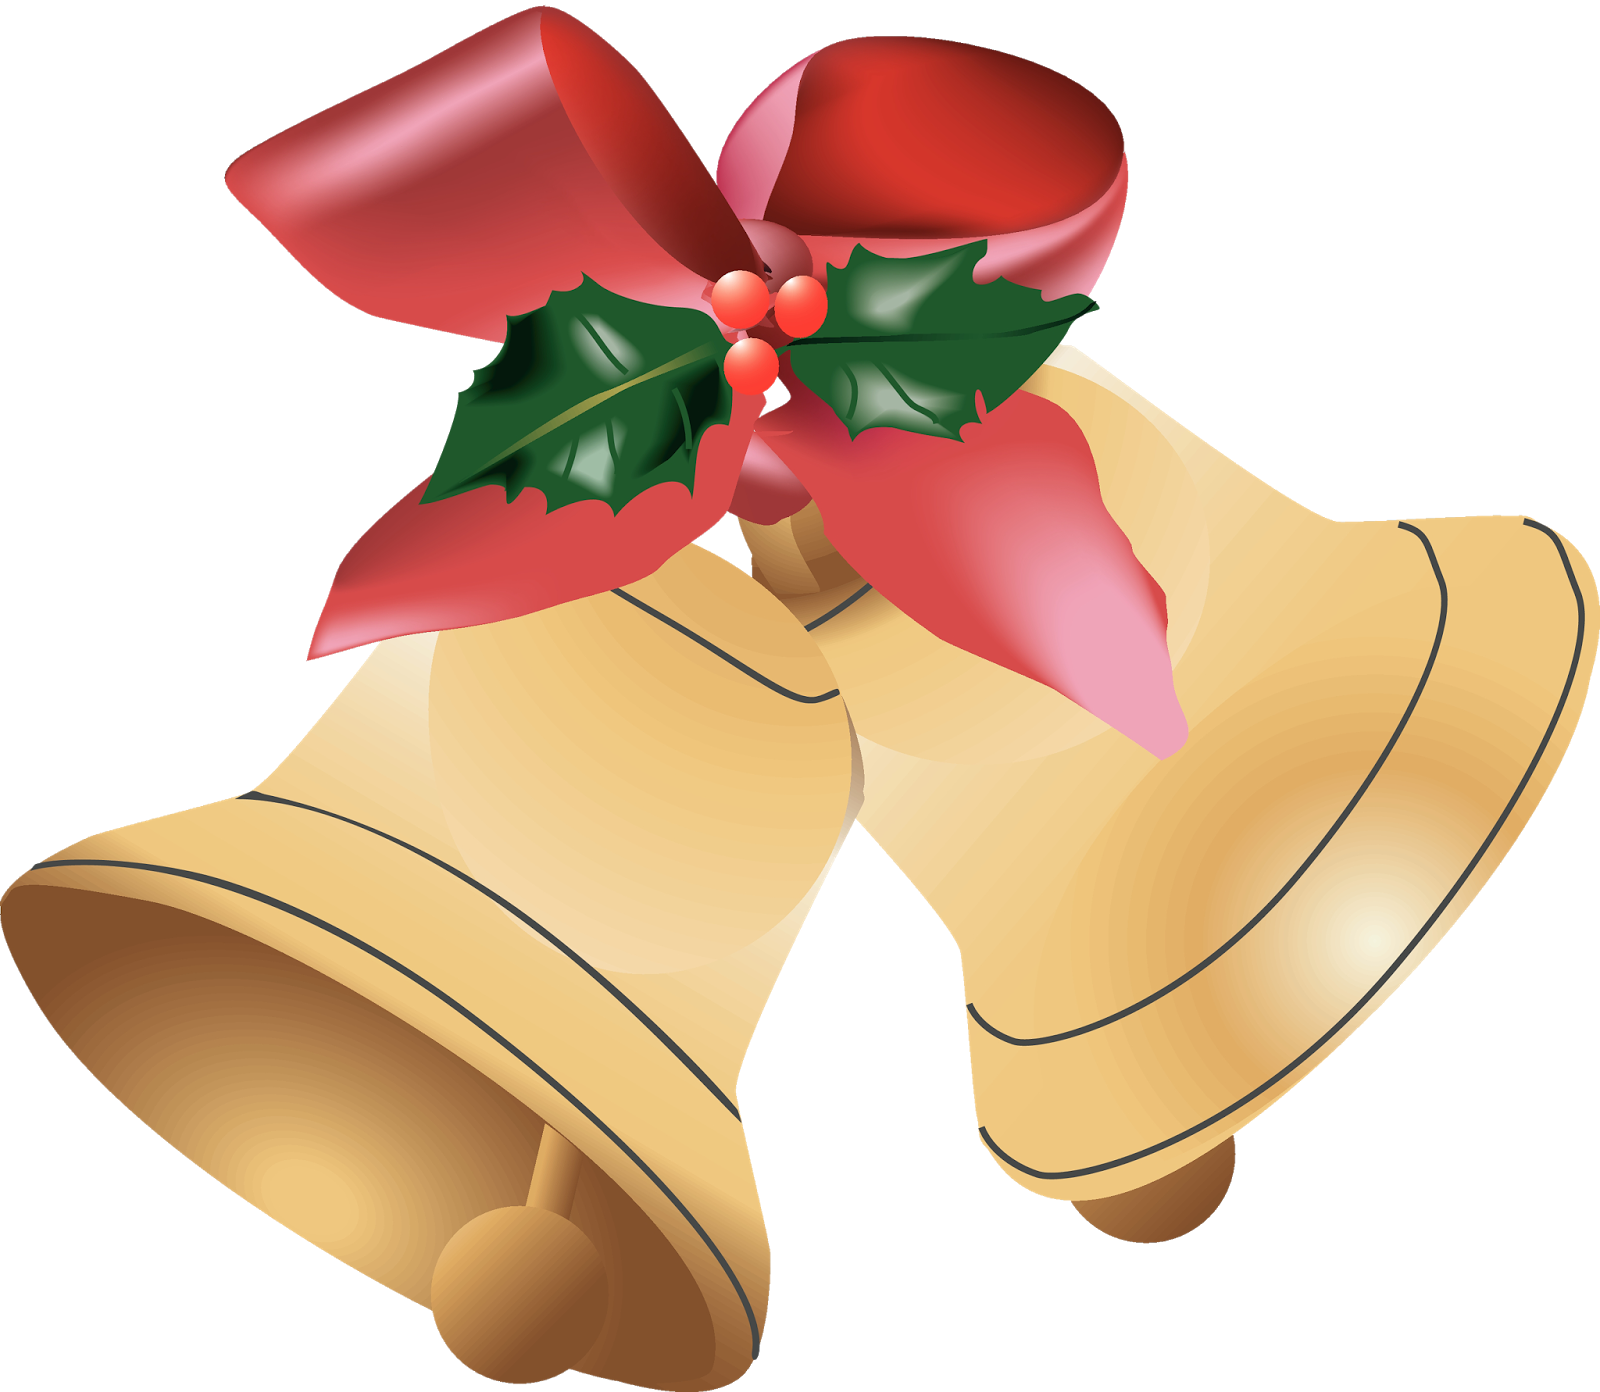 Christmas Bells Clip Art In Golden Colour For Hd Wallpapers And Wishes